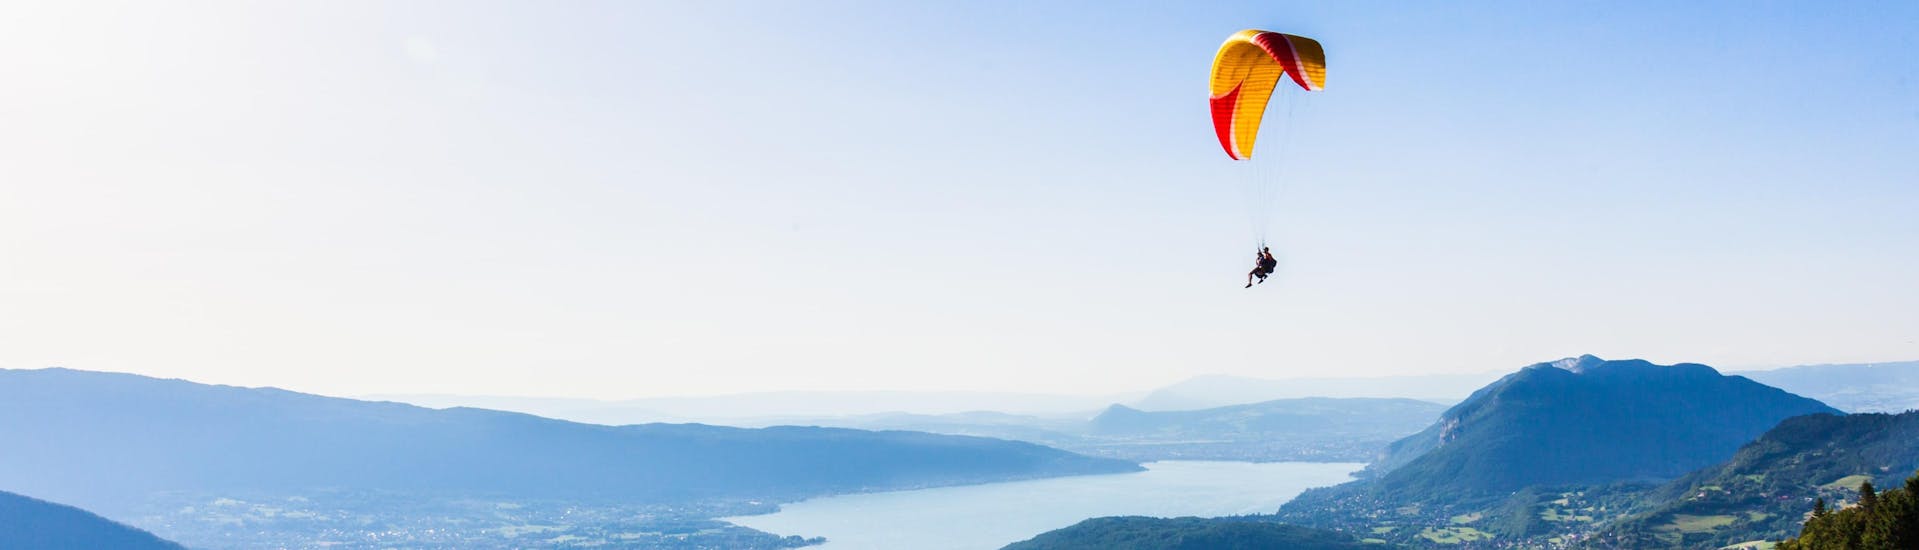 A tandem master and their passenger are gently gliding through the skies while paragliding at Lac d'Annecy.